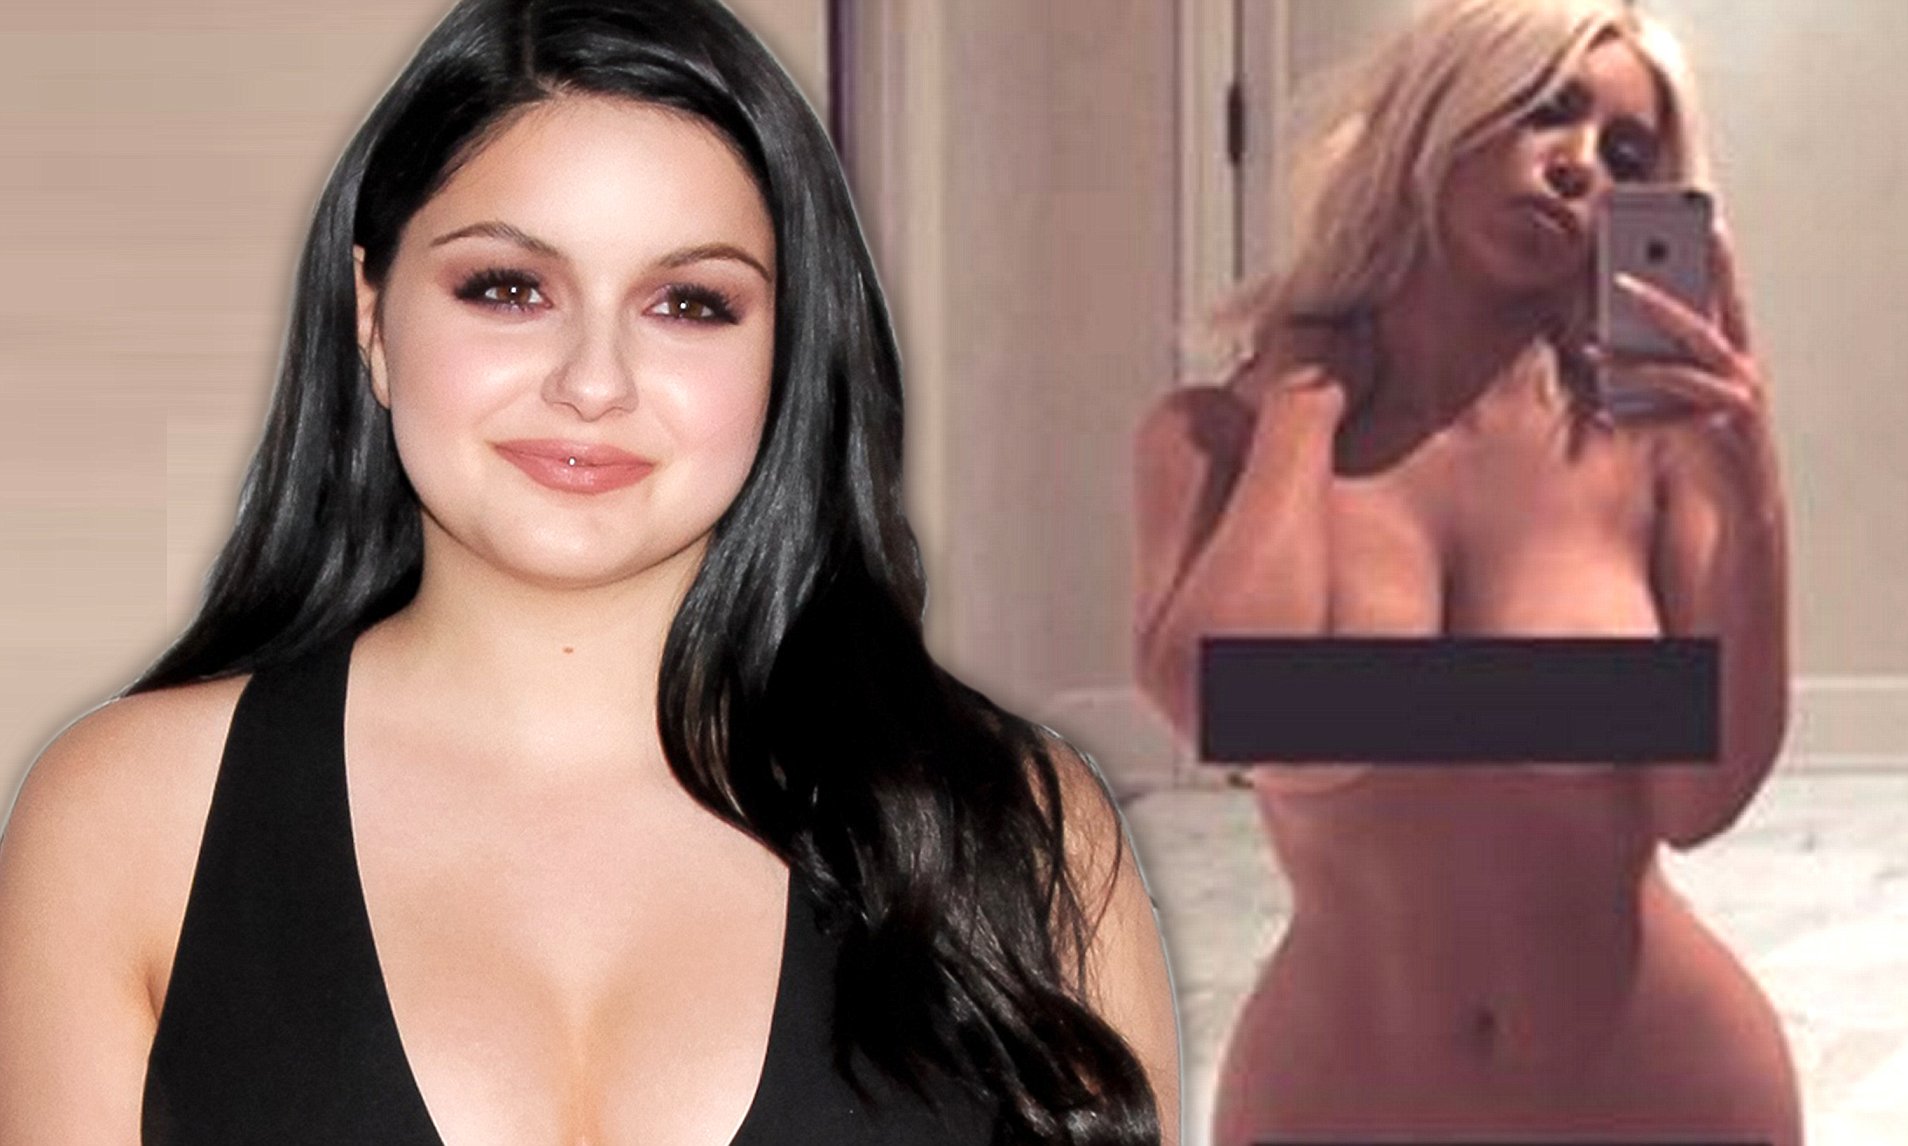 andrew kingstone recommends ariel winter nude pics pic